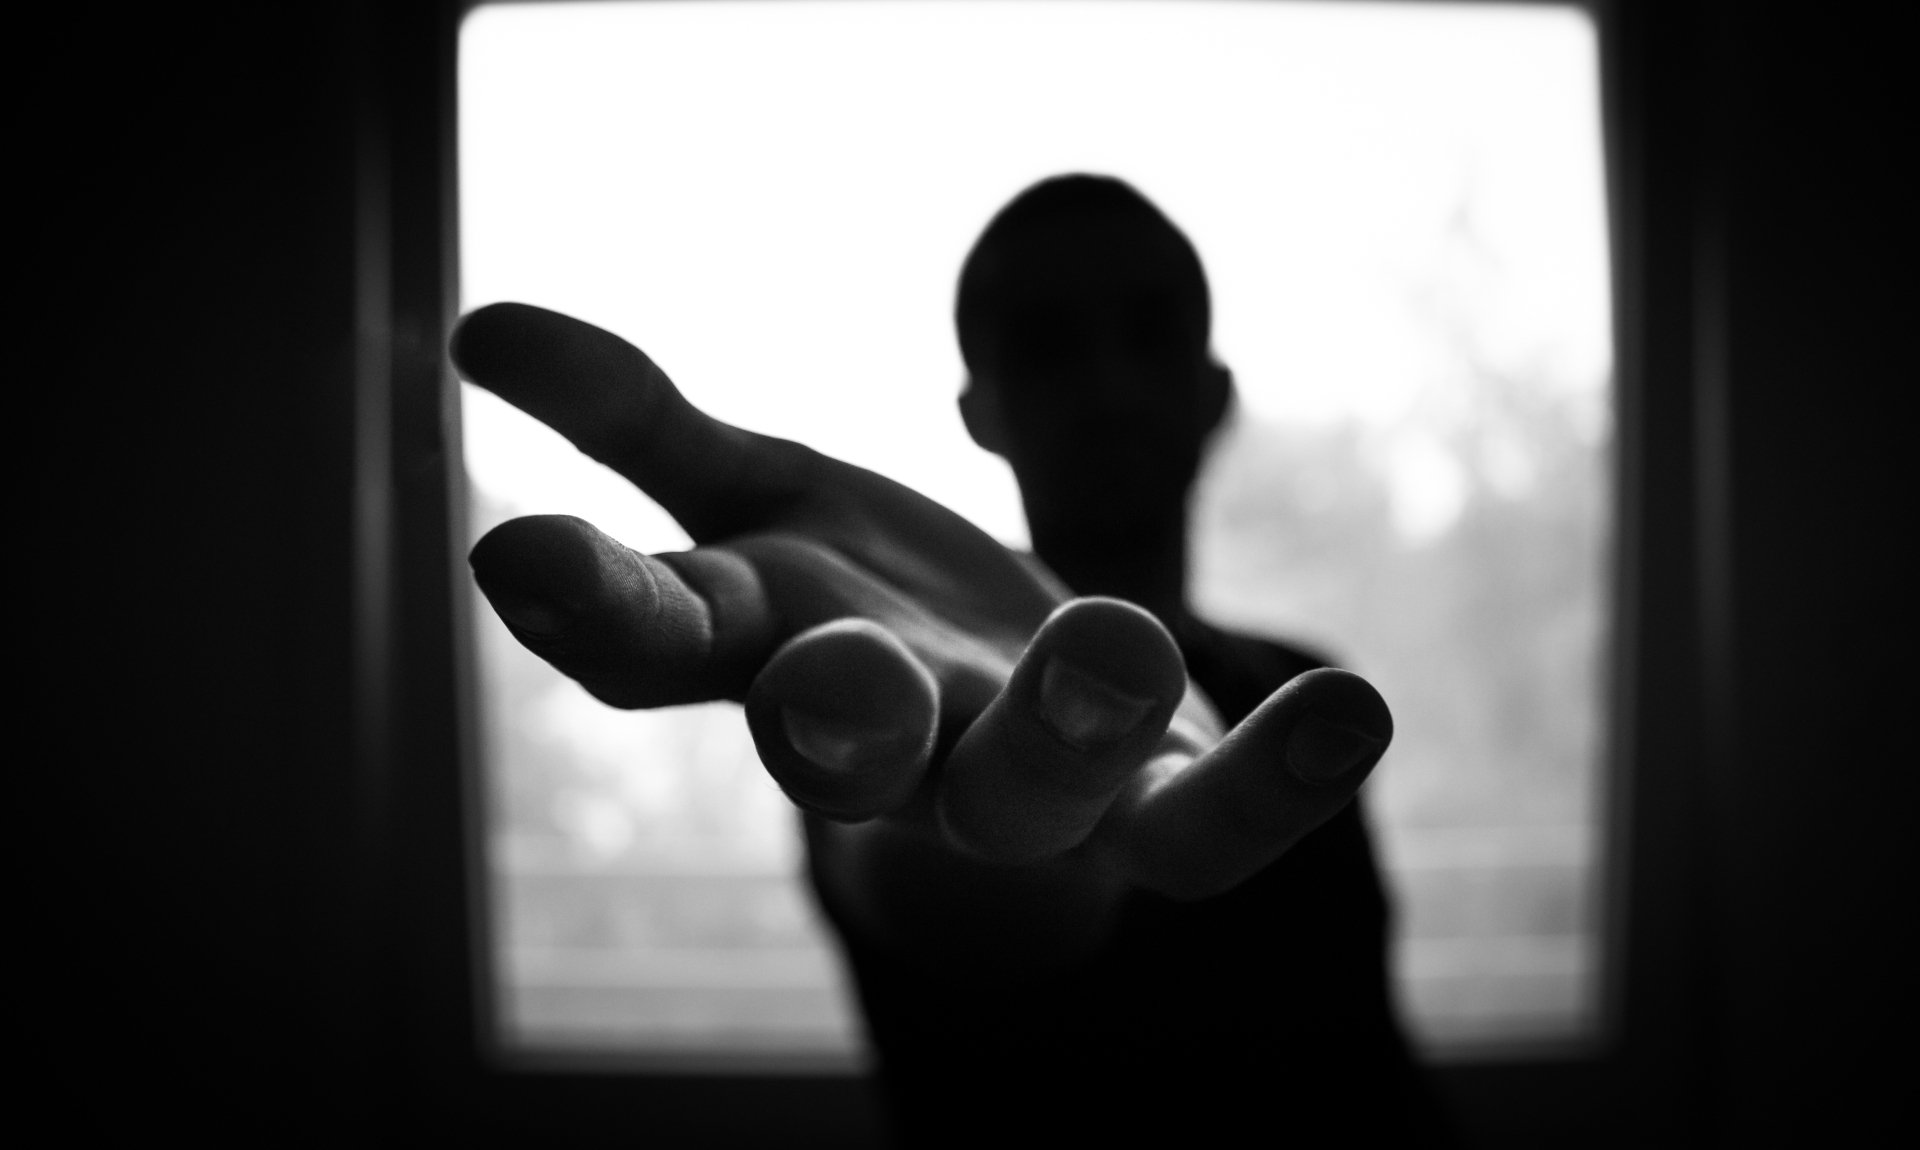 a black and white photo of a person reaching out their hand